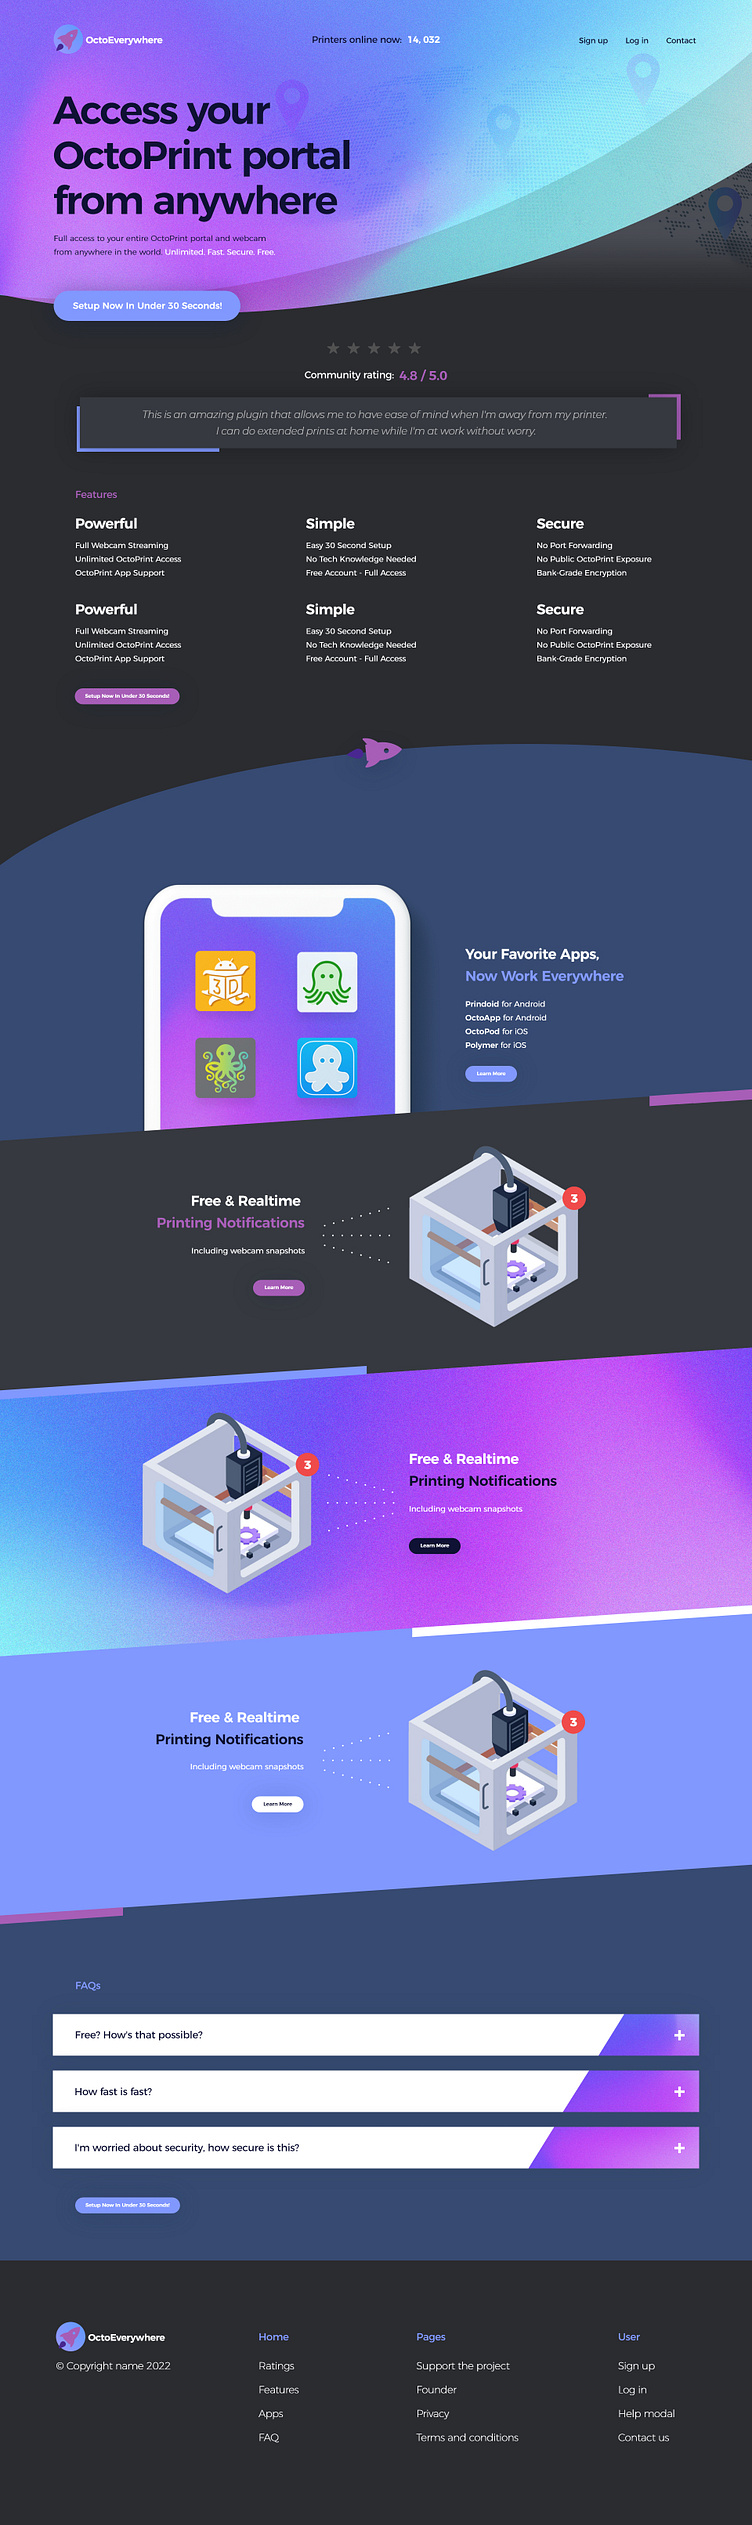 3d-printing-company-homepage-redesign-by-tinthumb-on-dribbble